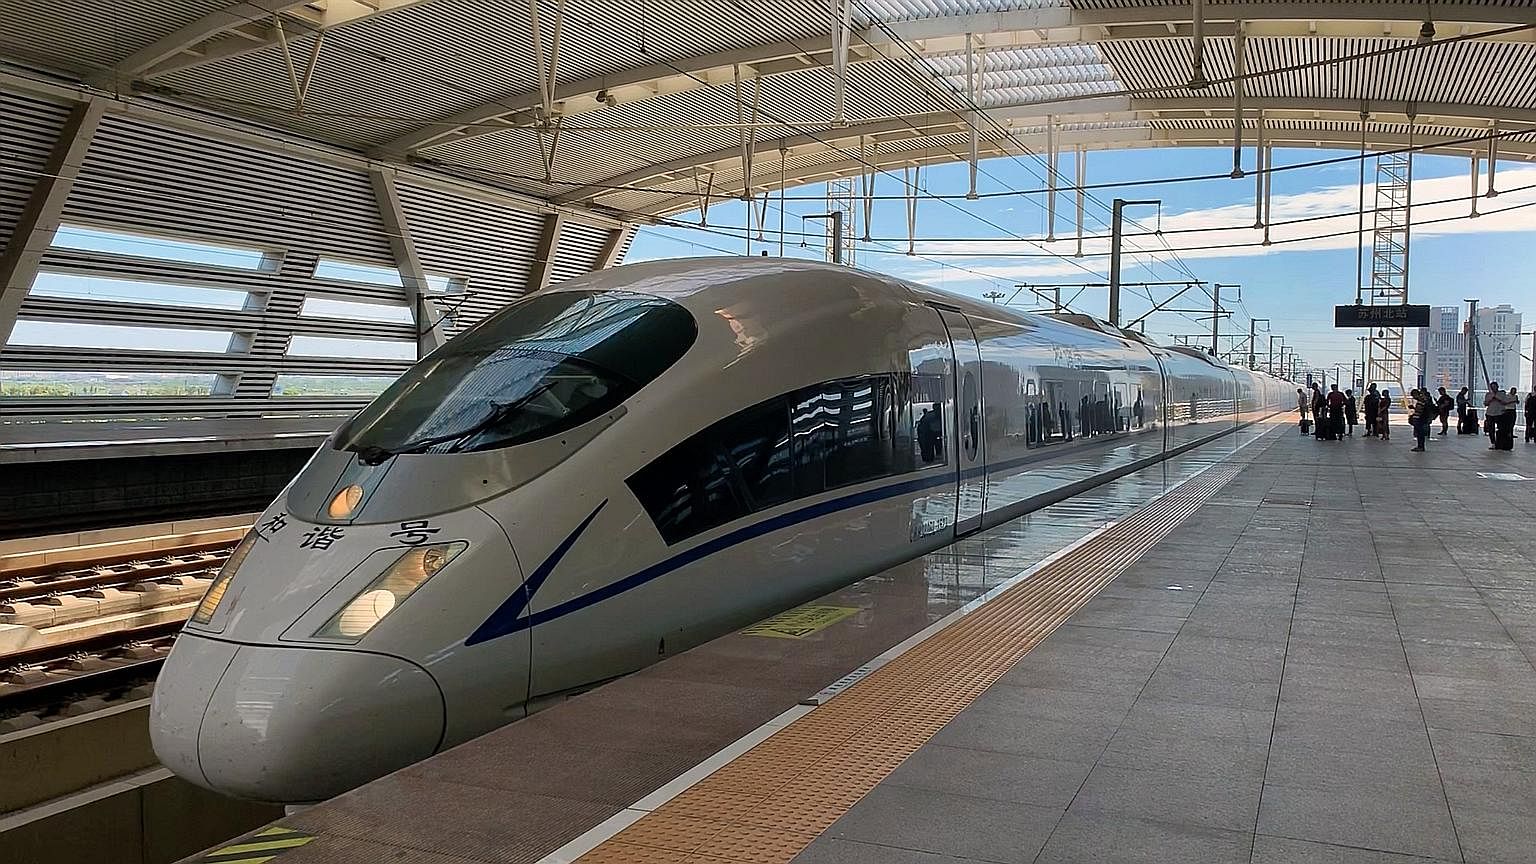 China's high-speed-rail network, the world's longest, tops 30,000km this year, offering seemingly endless destinations to visit.